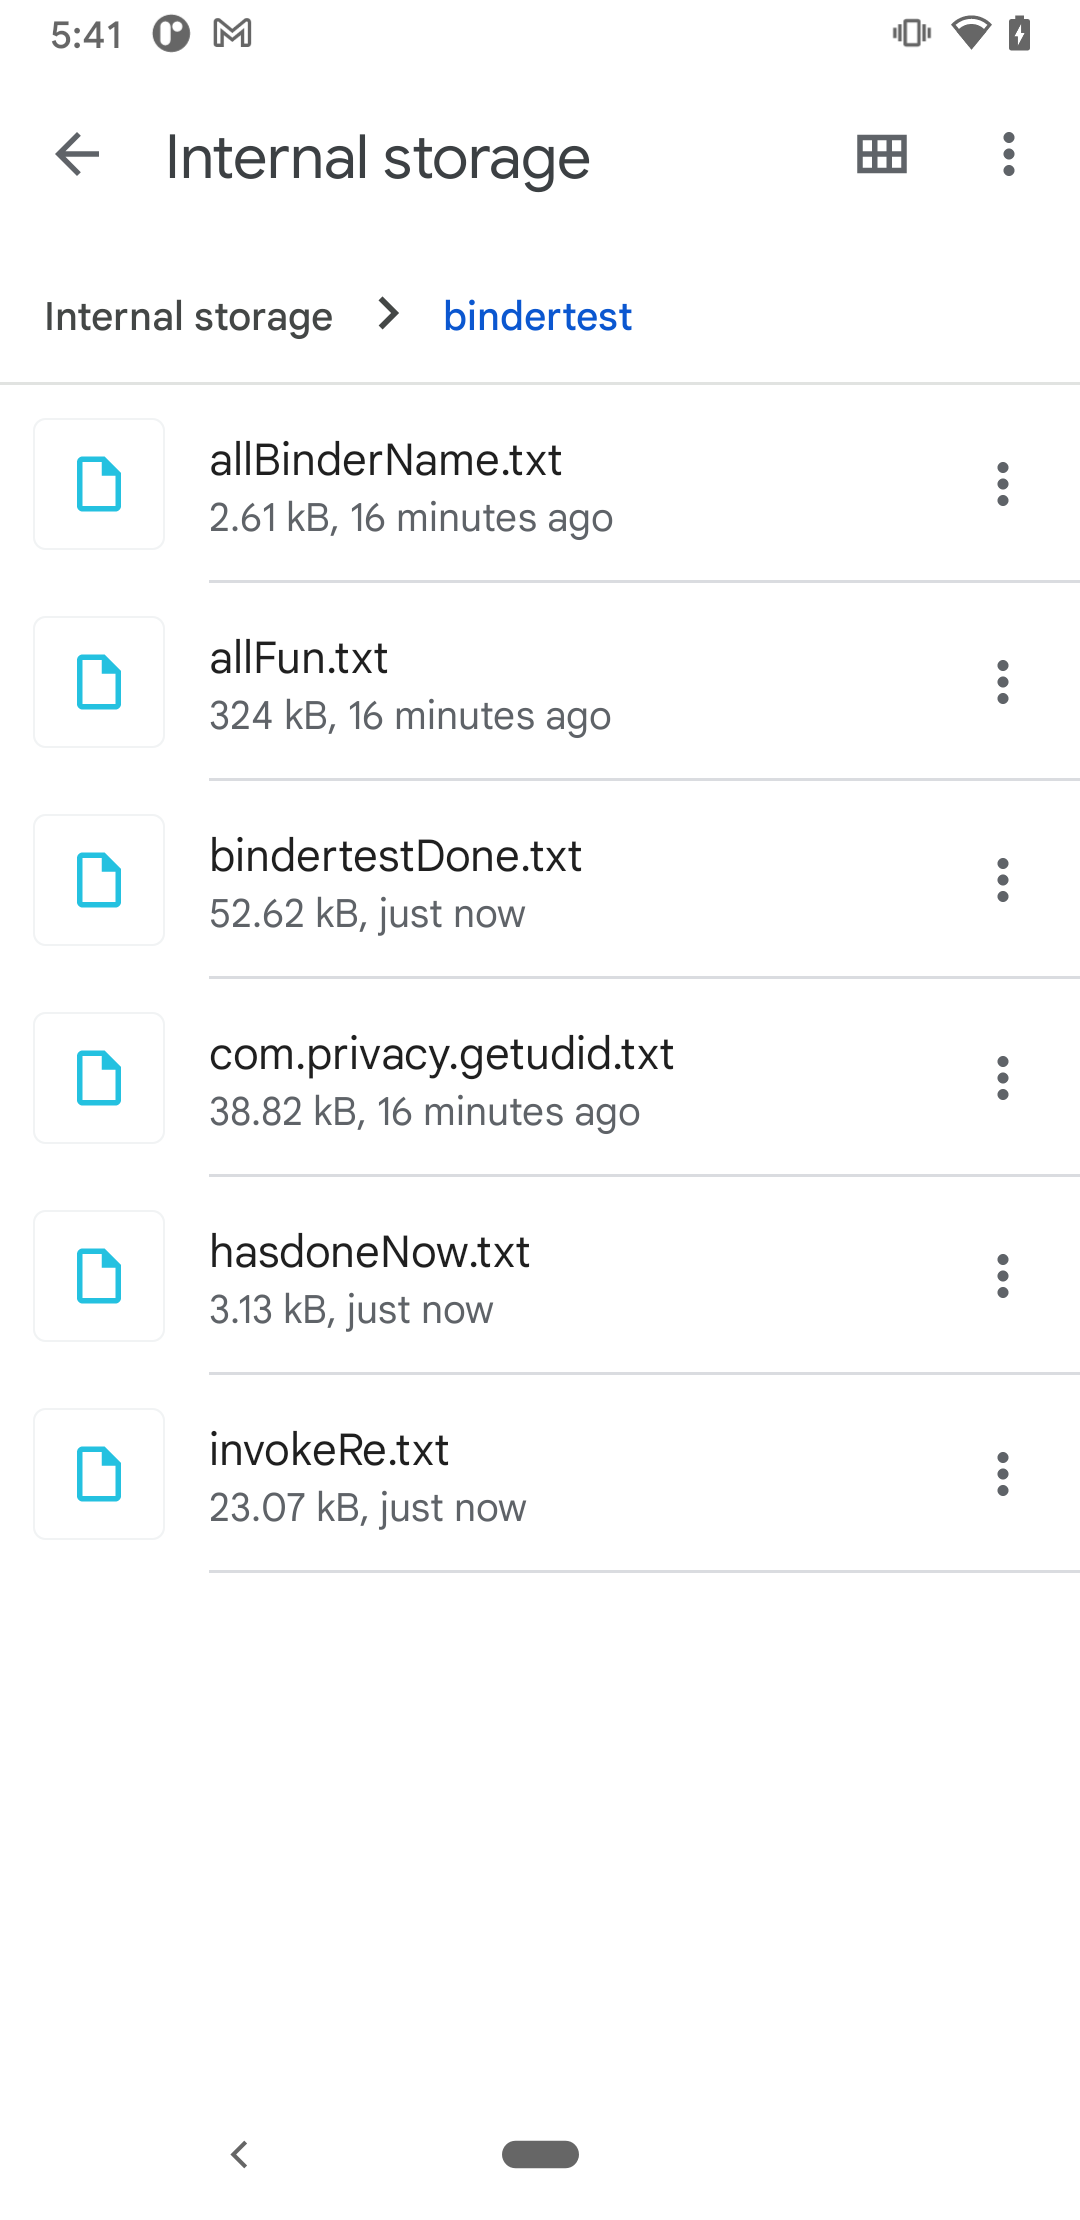 The text files generated after a full execution of the tester app